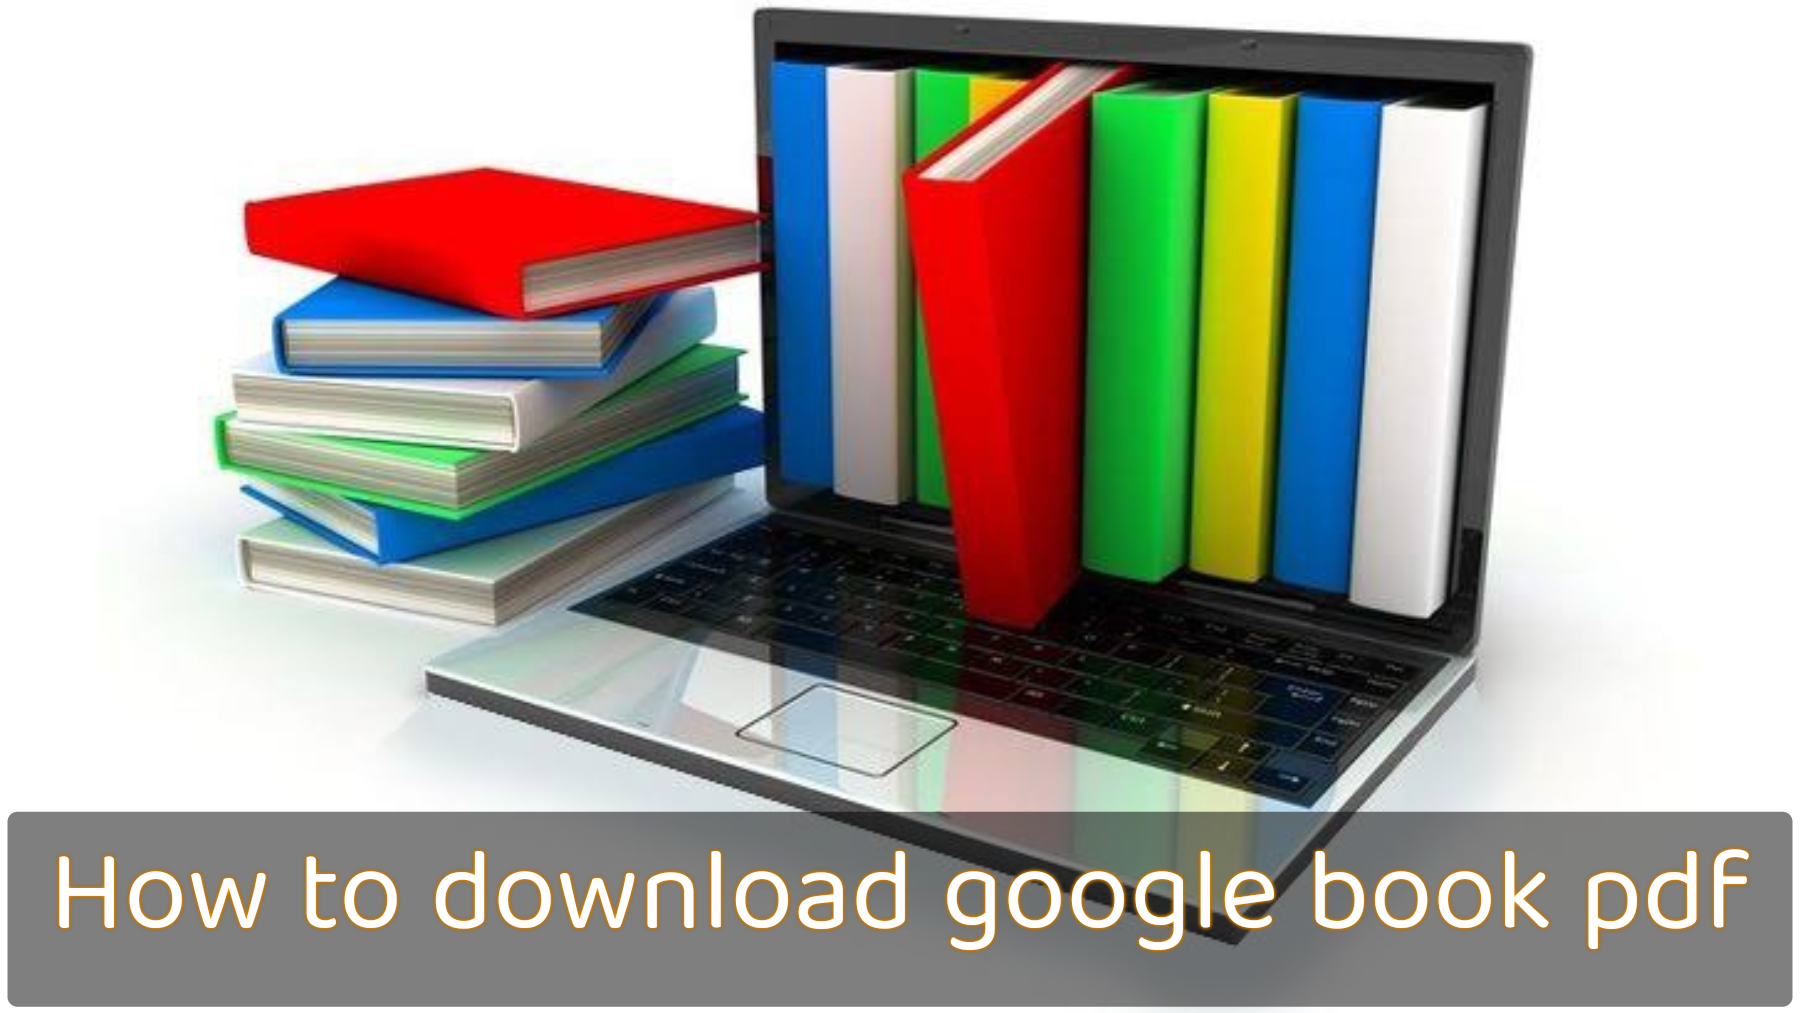 How to download google book pdf, Download google book pdf, Google book pdf download, Download google book pdf online